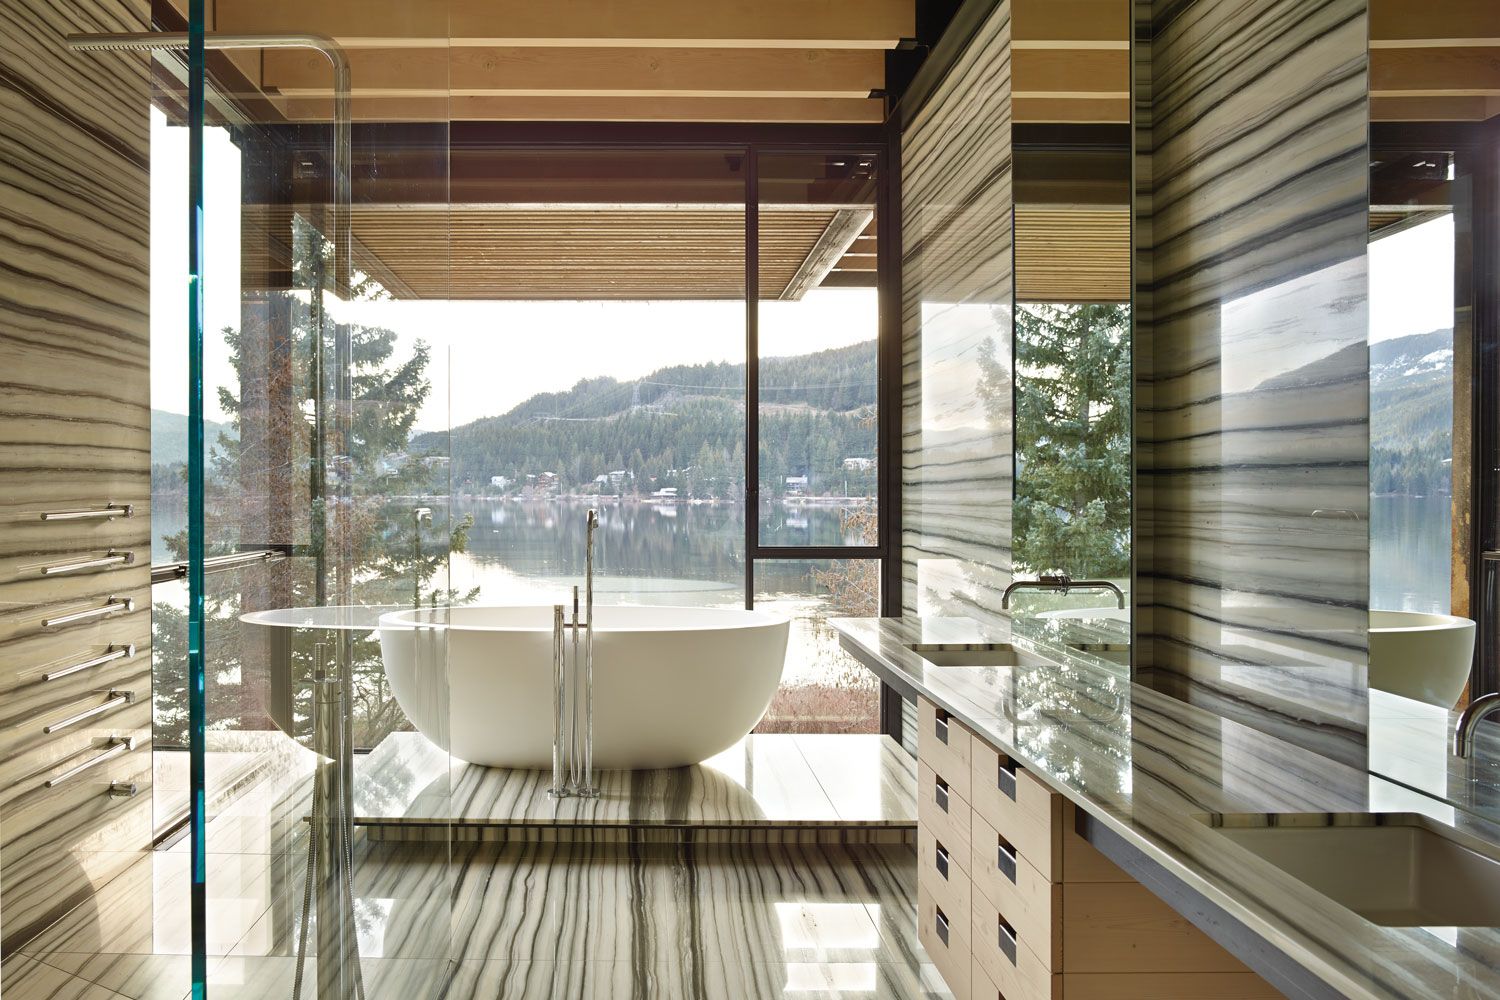 Designed by Tom Kundig of Olson Kundig, the master bath of this Whistler, Canada, ski house masterfully brings the outside in with its Zebrino marble by Marble Art and local wood from fir trees.